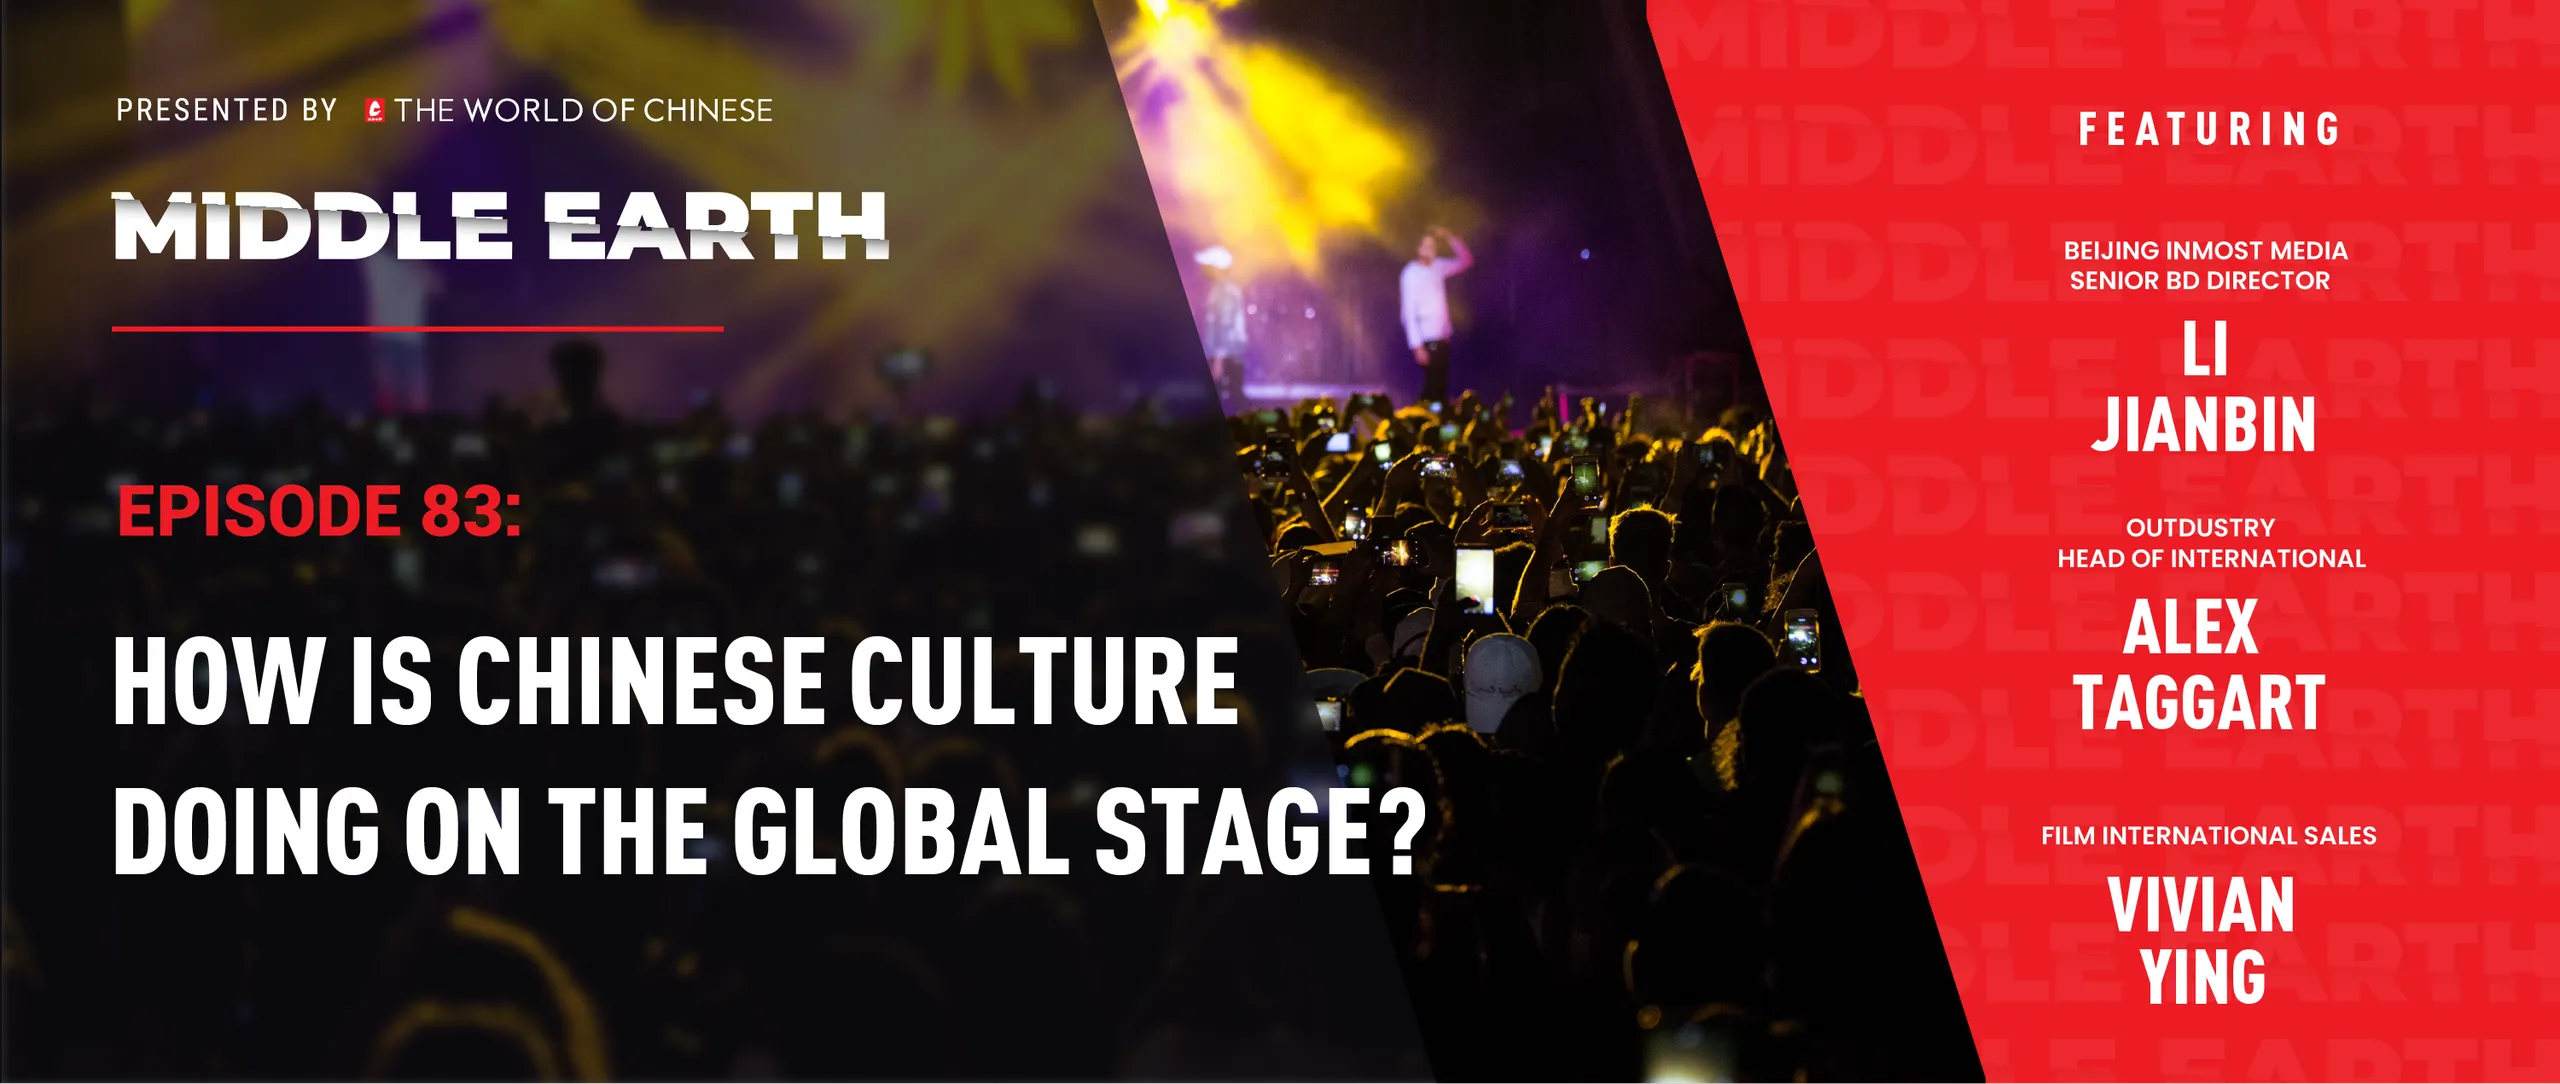 #83 How is Chinese culture going on the global stage? 16-9